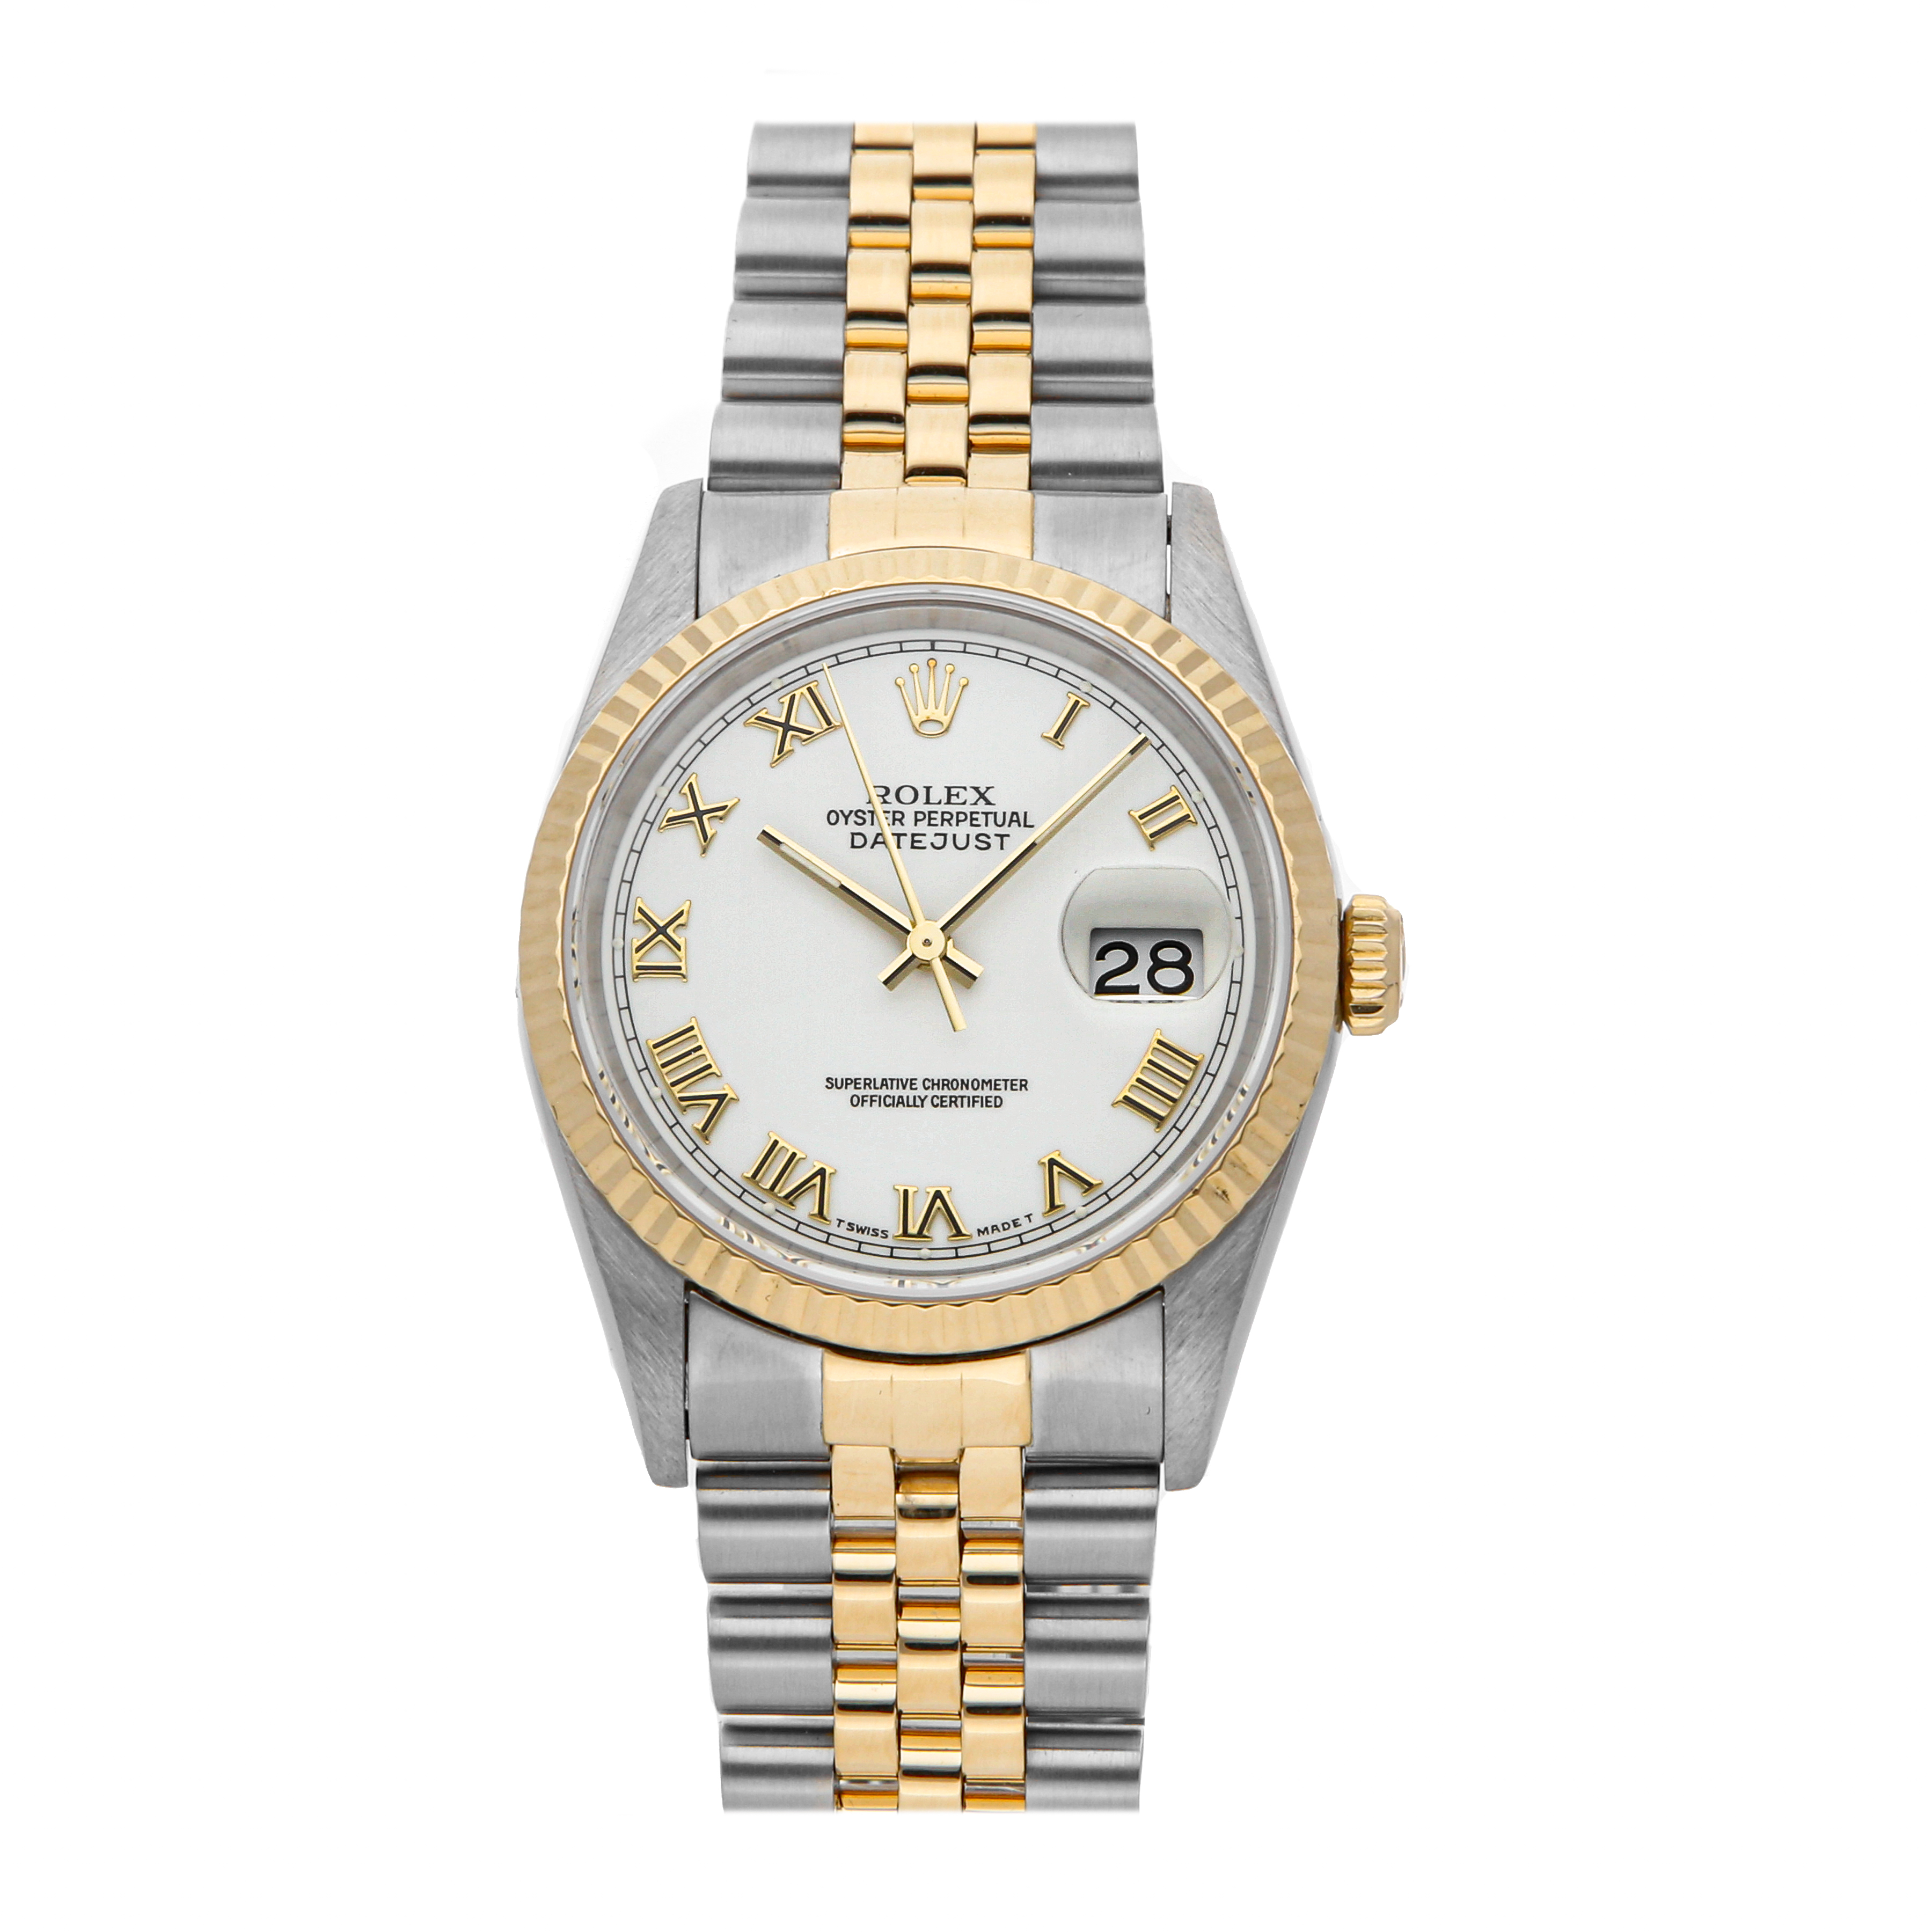 Certified Pre-Owned Rolex Watches 